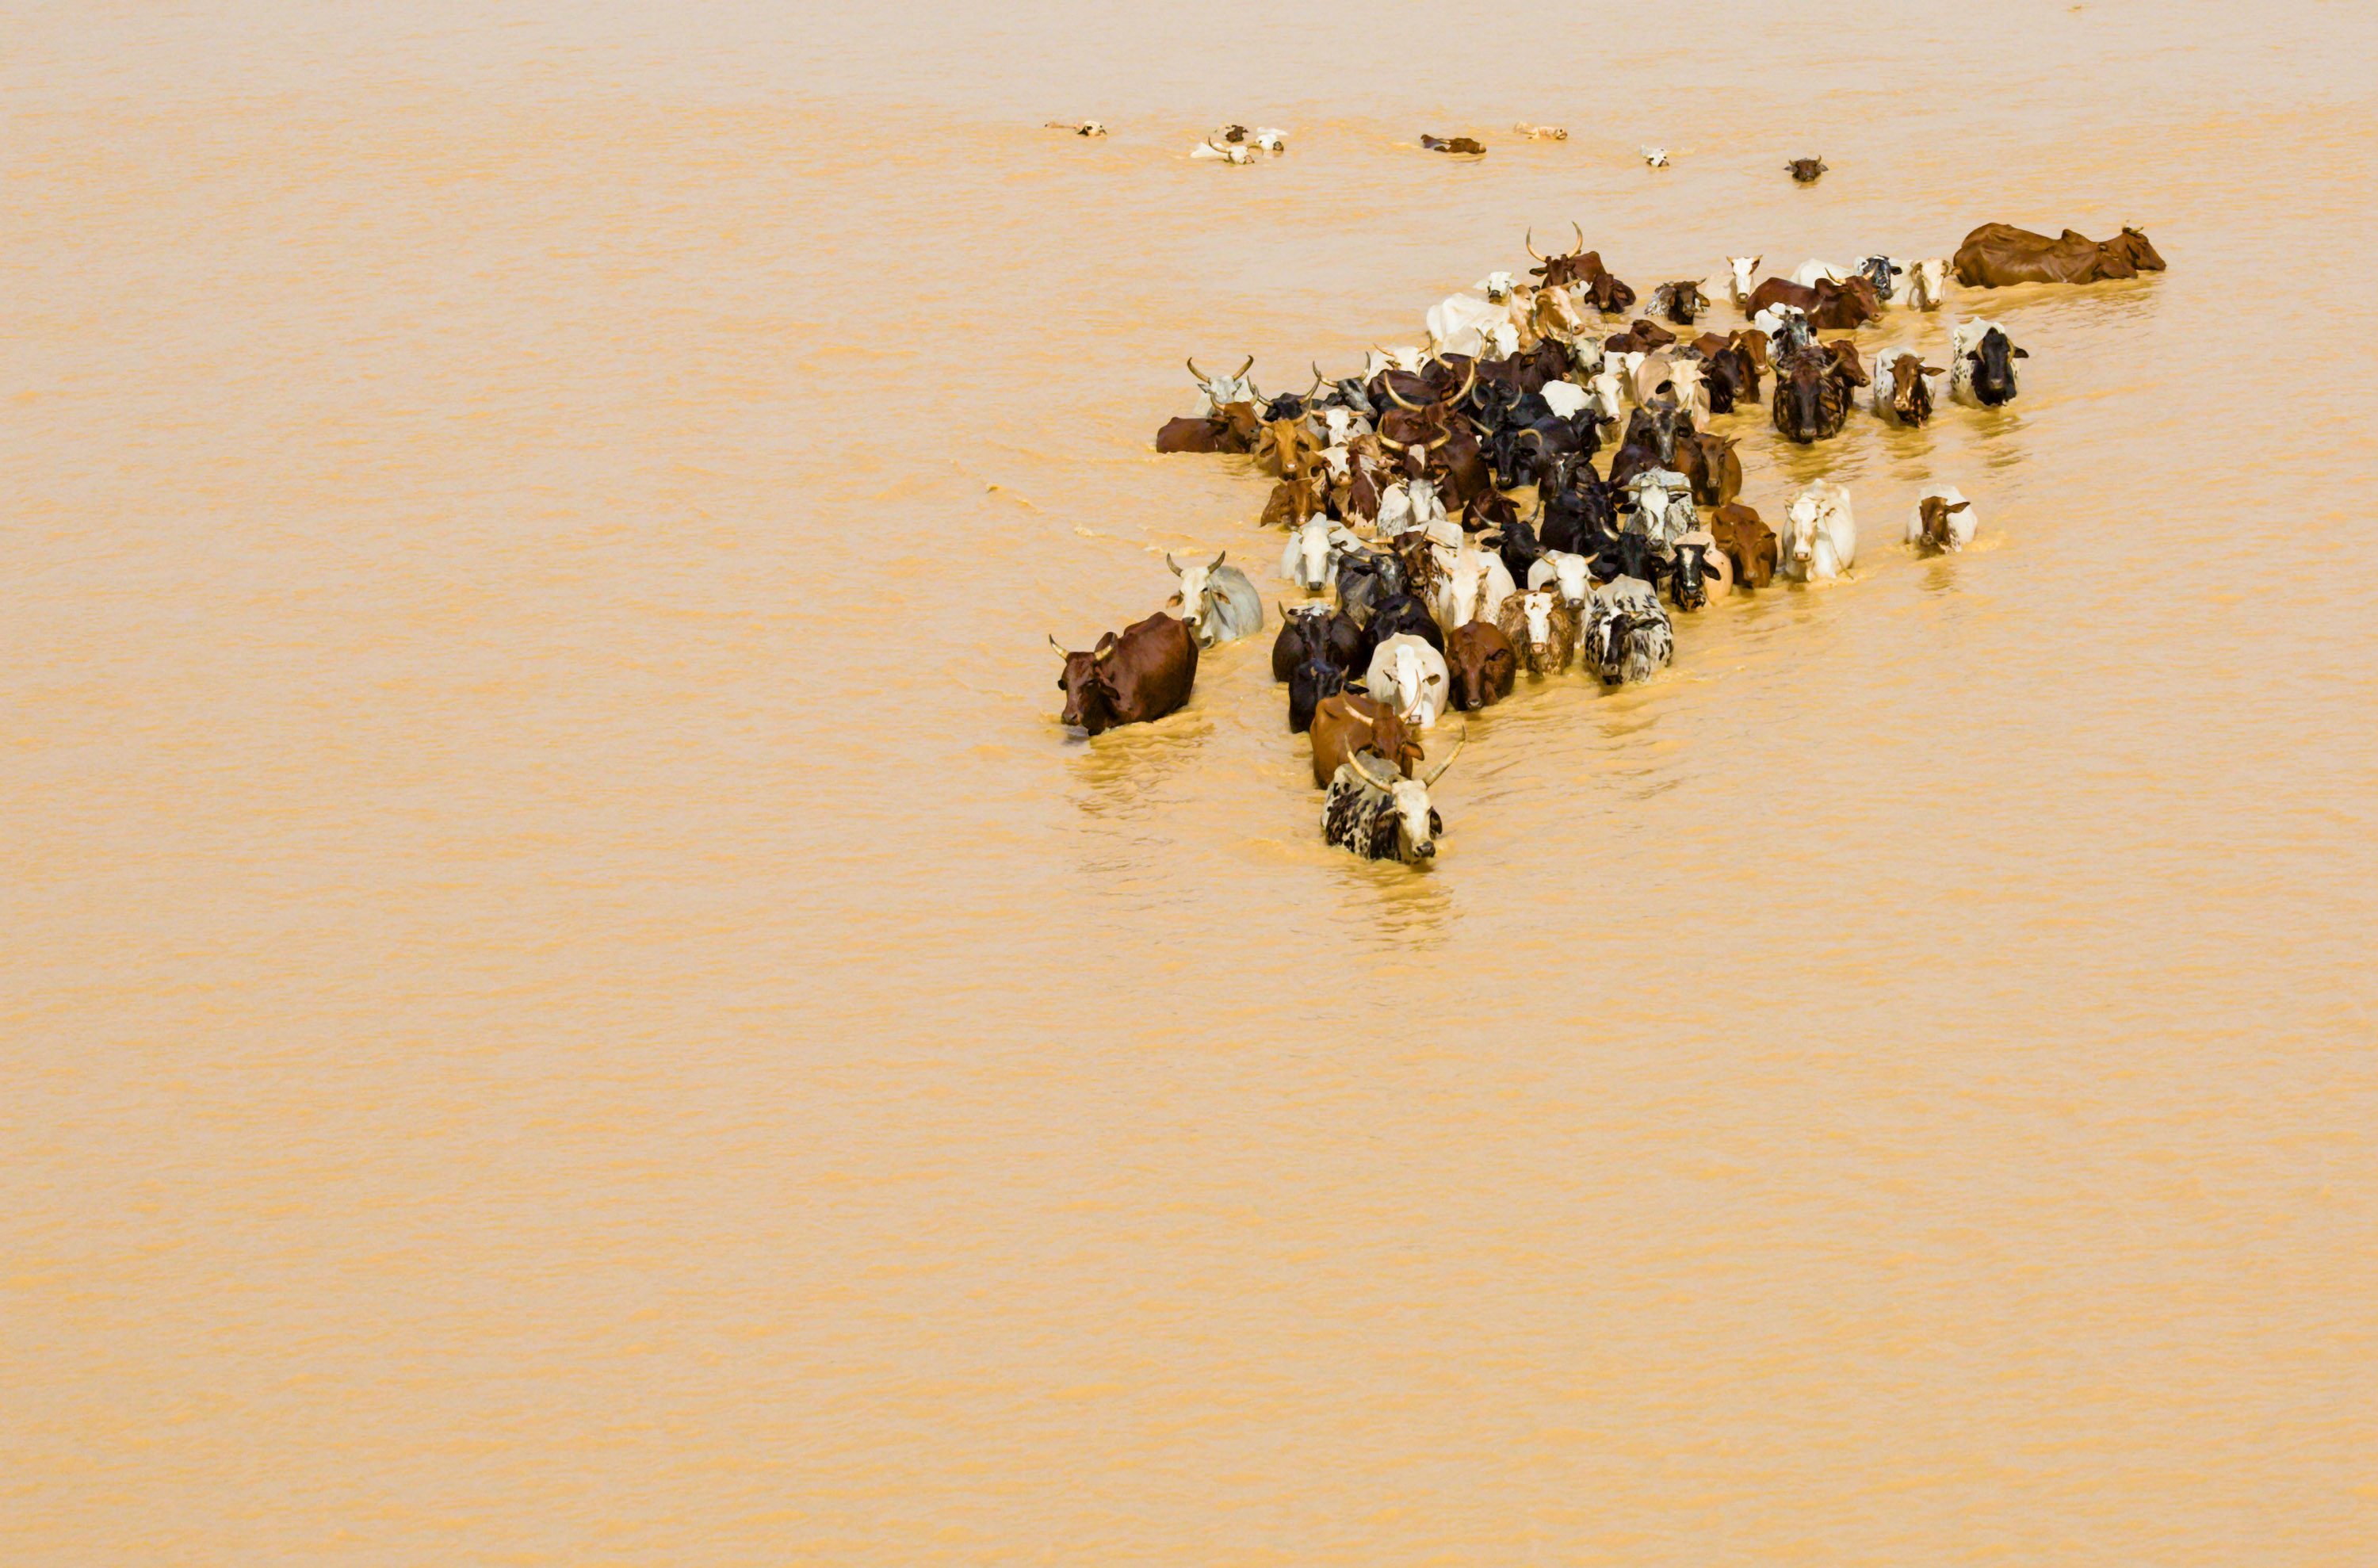 drone shot of cattle immersed in brown muddy water